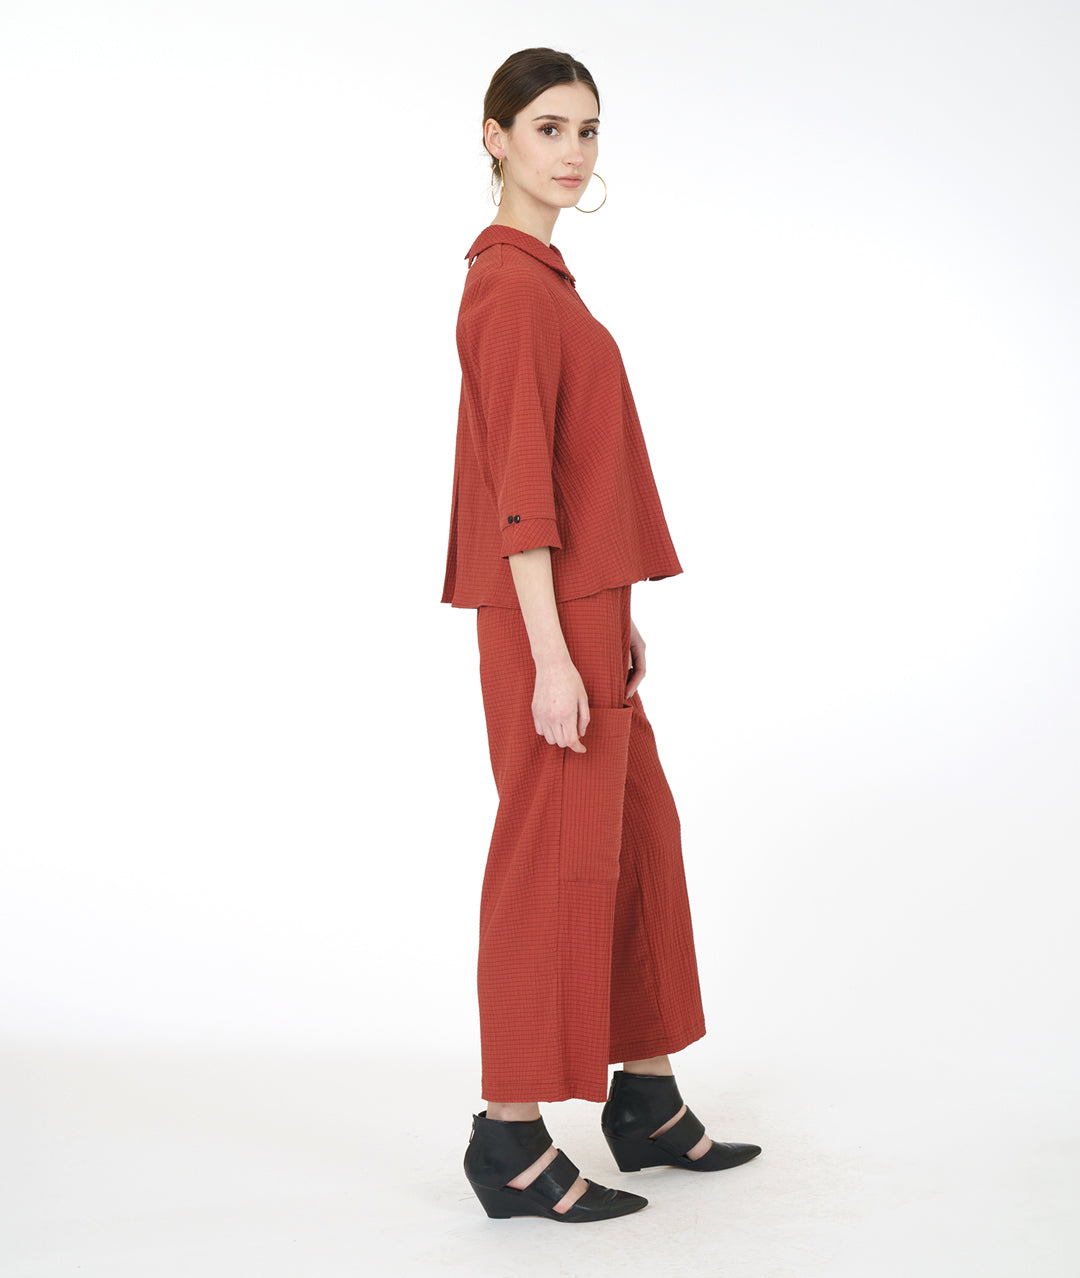 model in a sienna color pant with asymmetrical cargo pockets, worn with a matching button down top with 3/4 sleeves and a twin button detail up the front